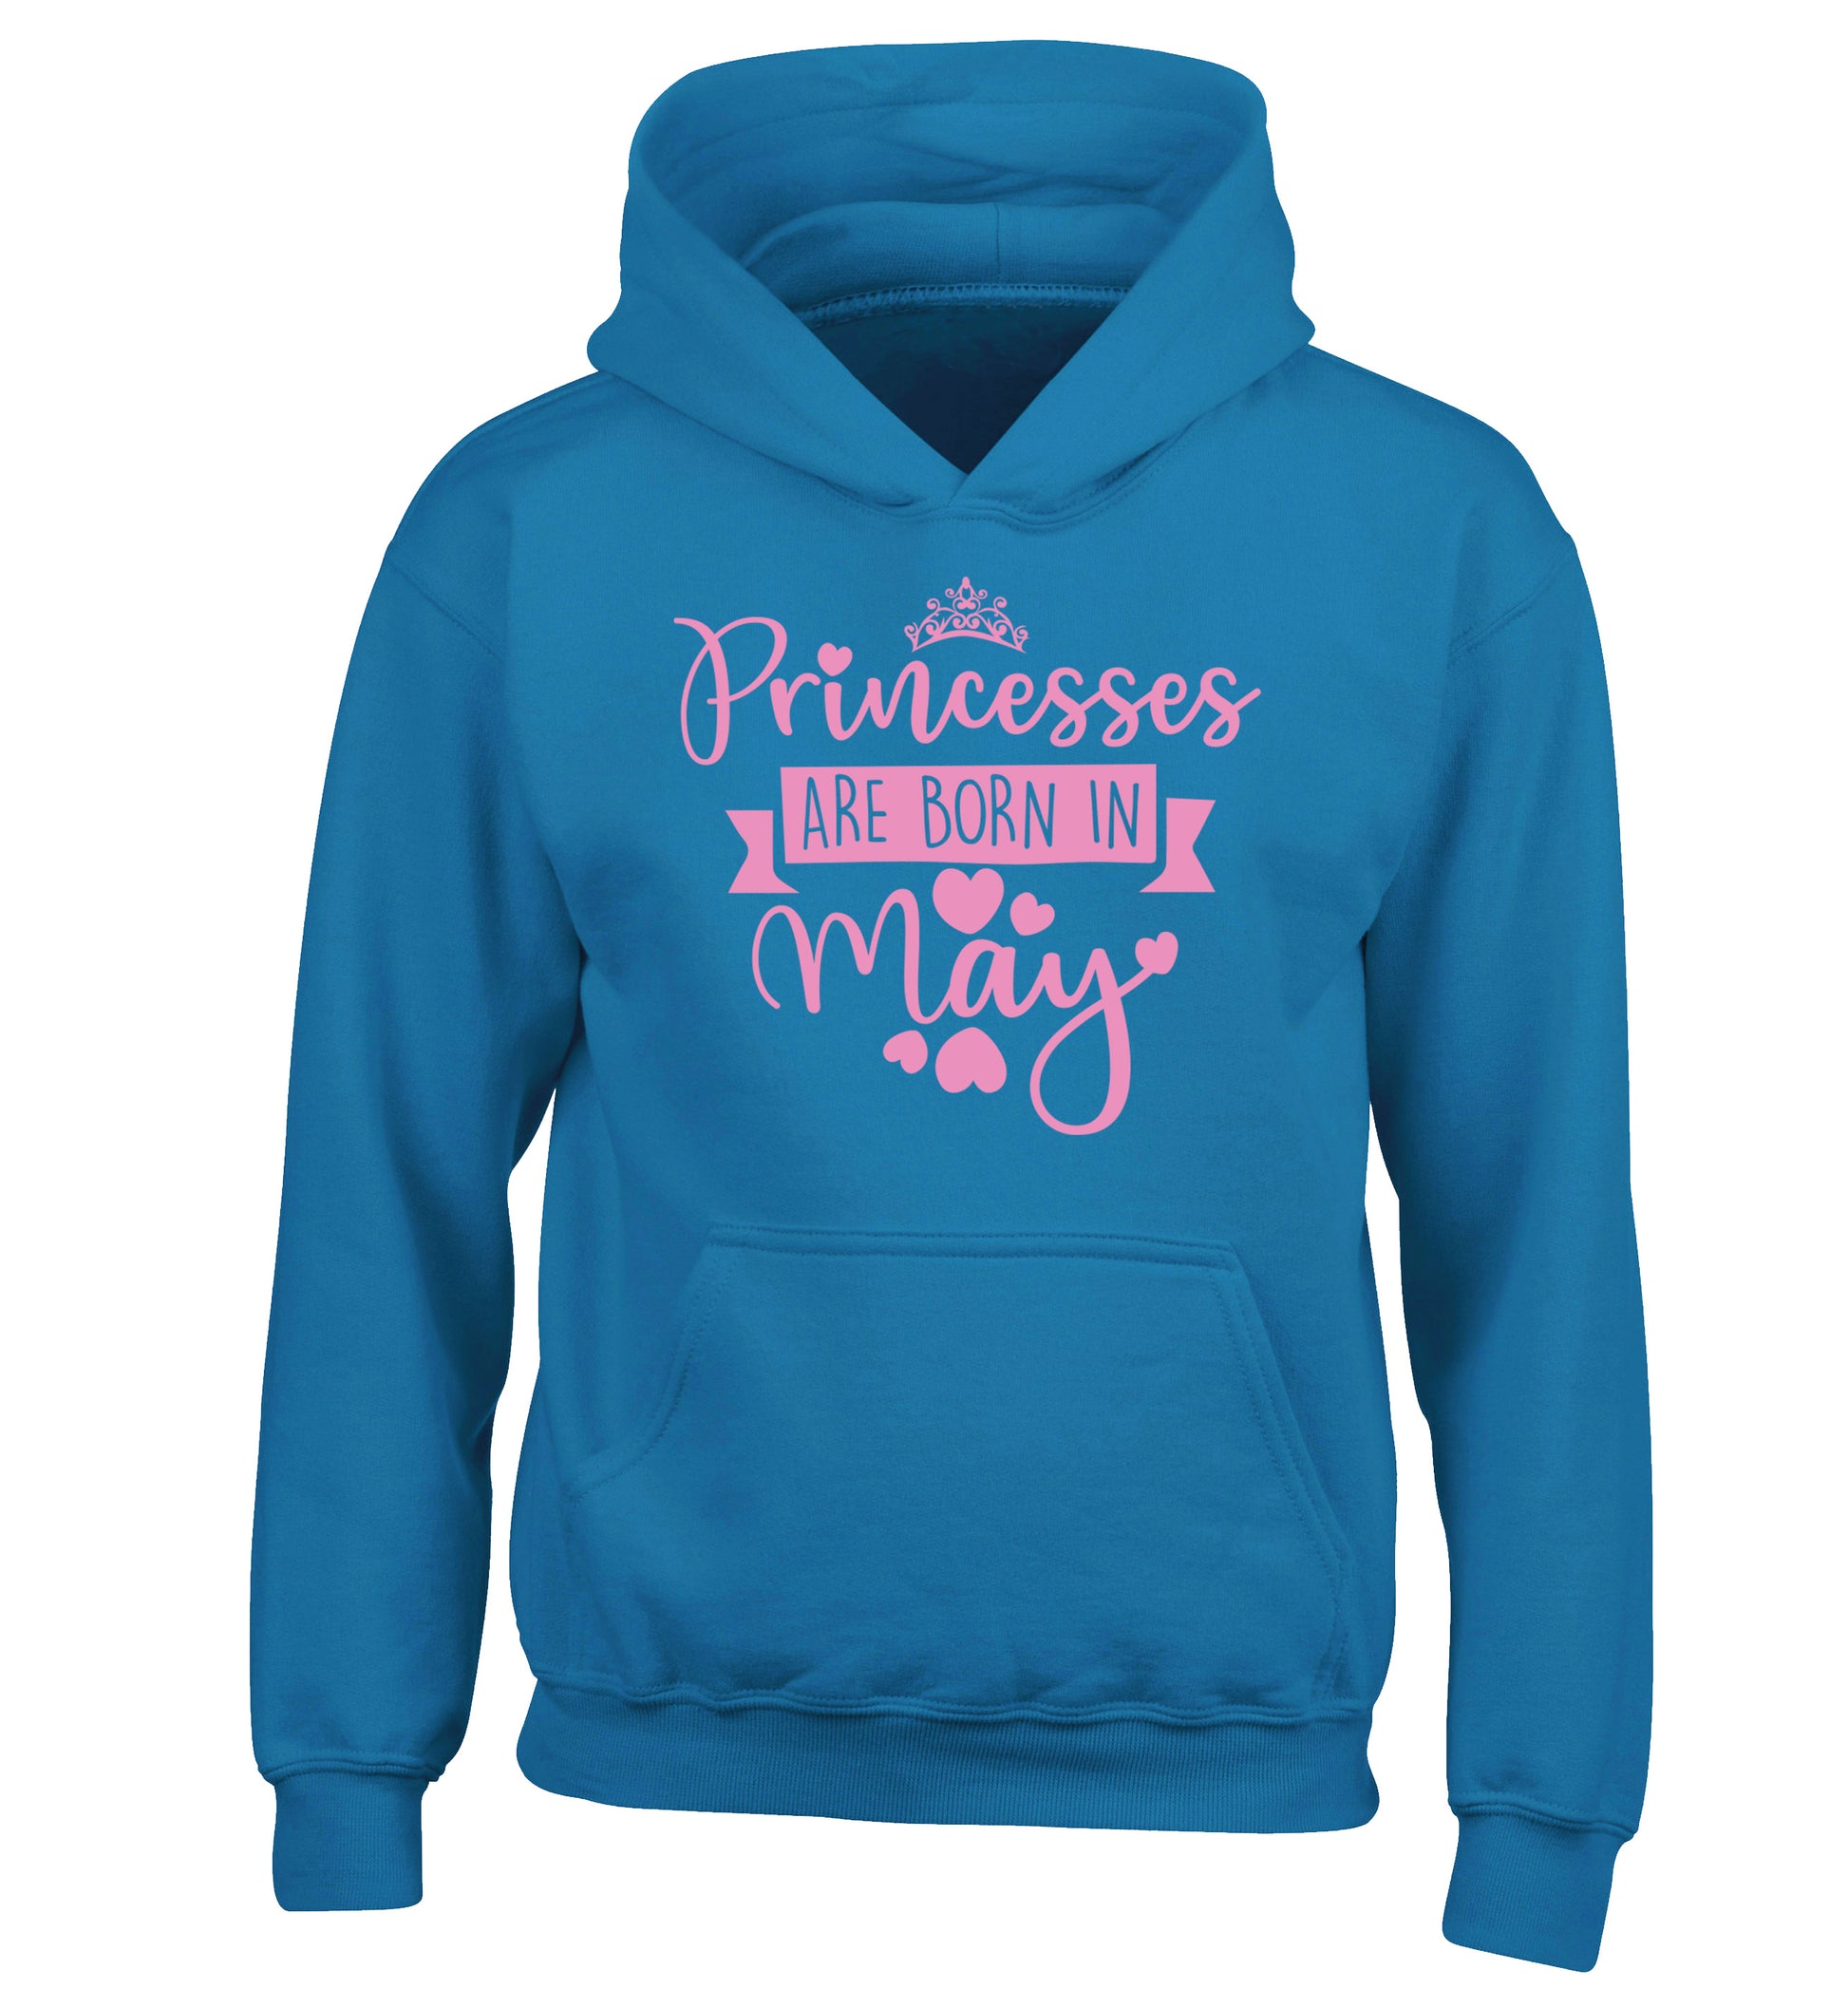 Princesses are born in May children's blue hoodie 12-13 Years